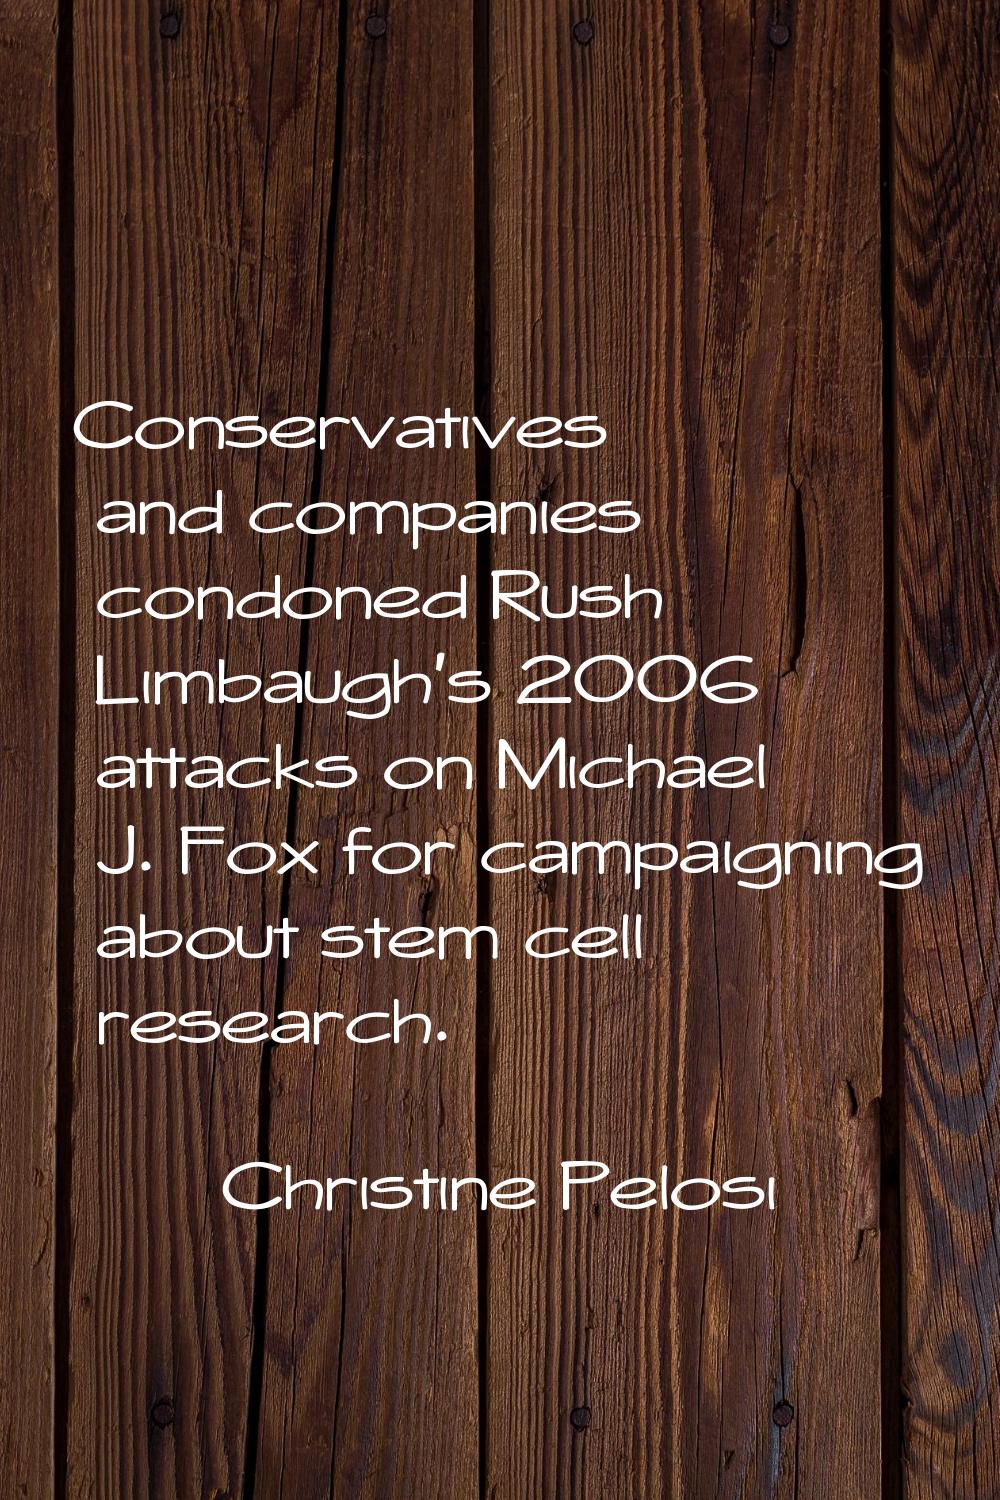 Conservatives and companies condoned Rush Limbaugh's 2006 attacks on Michael J. Fox for campaigning